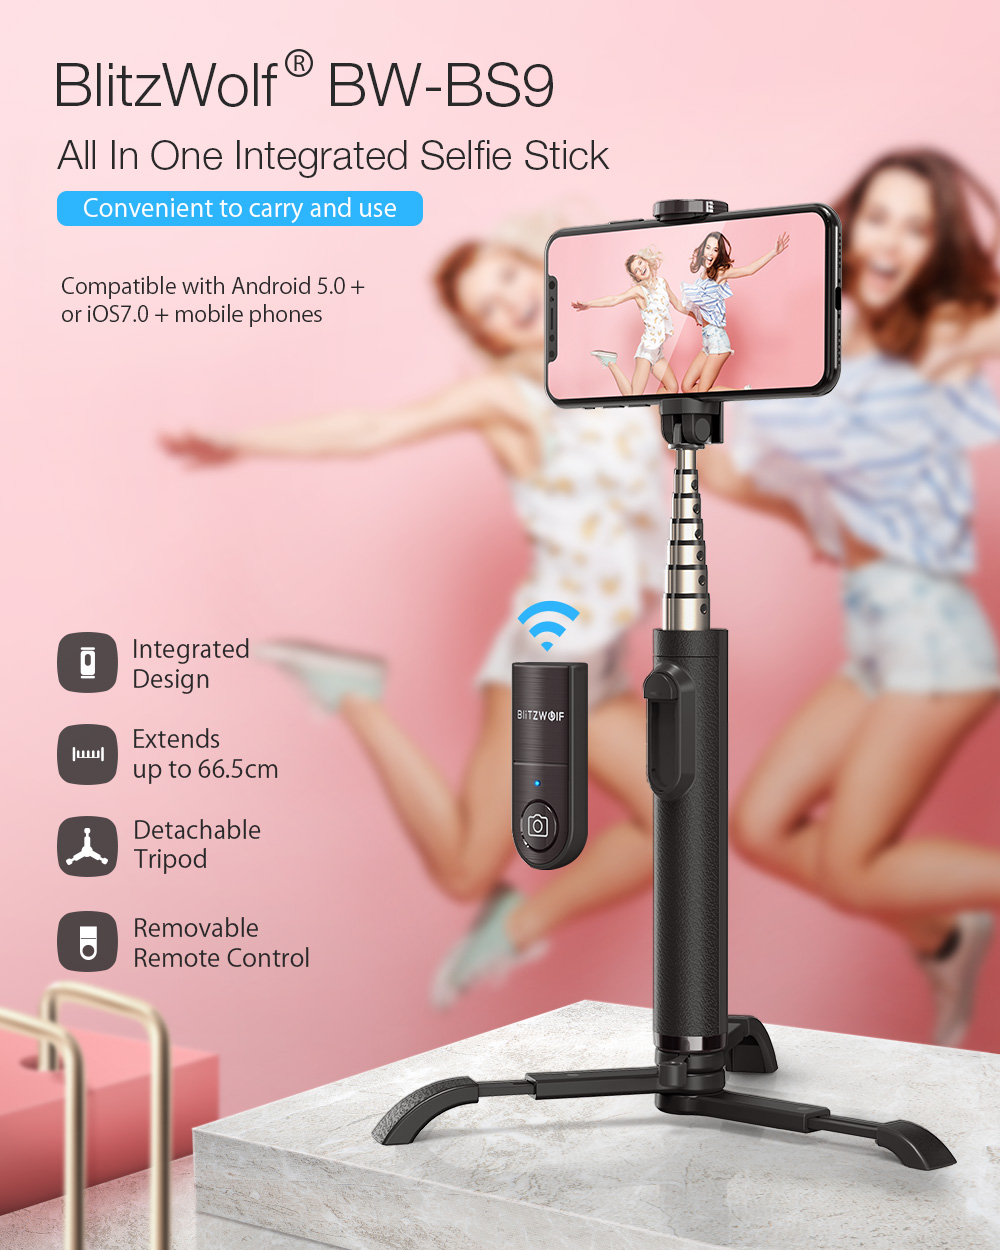 BlitzWolf Selfie Stick Tripod, Bluetooth Wireless Phone Stick Stand, All In One Integrated Detachable for iPhone Android Cell Phone Sport Camera - Black - image 2 of 9